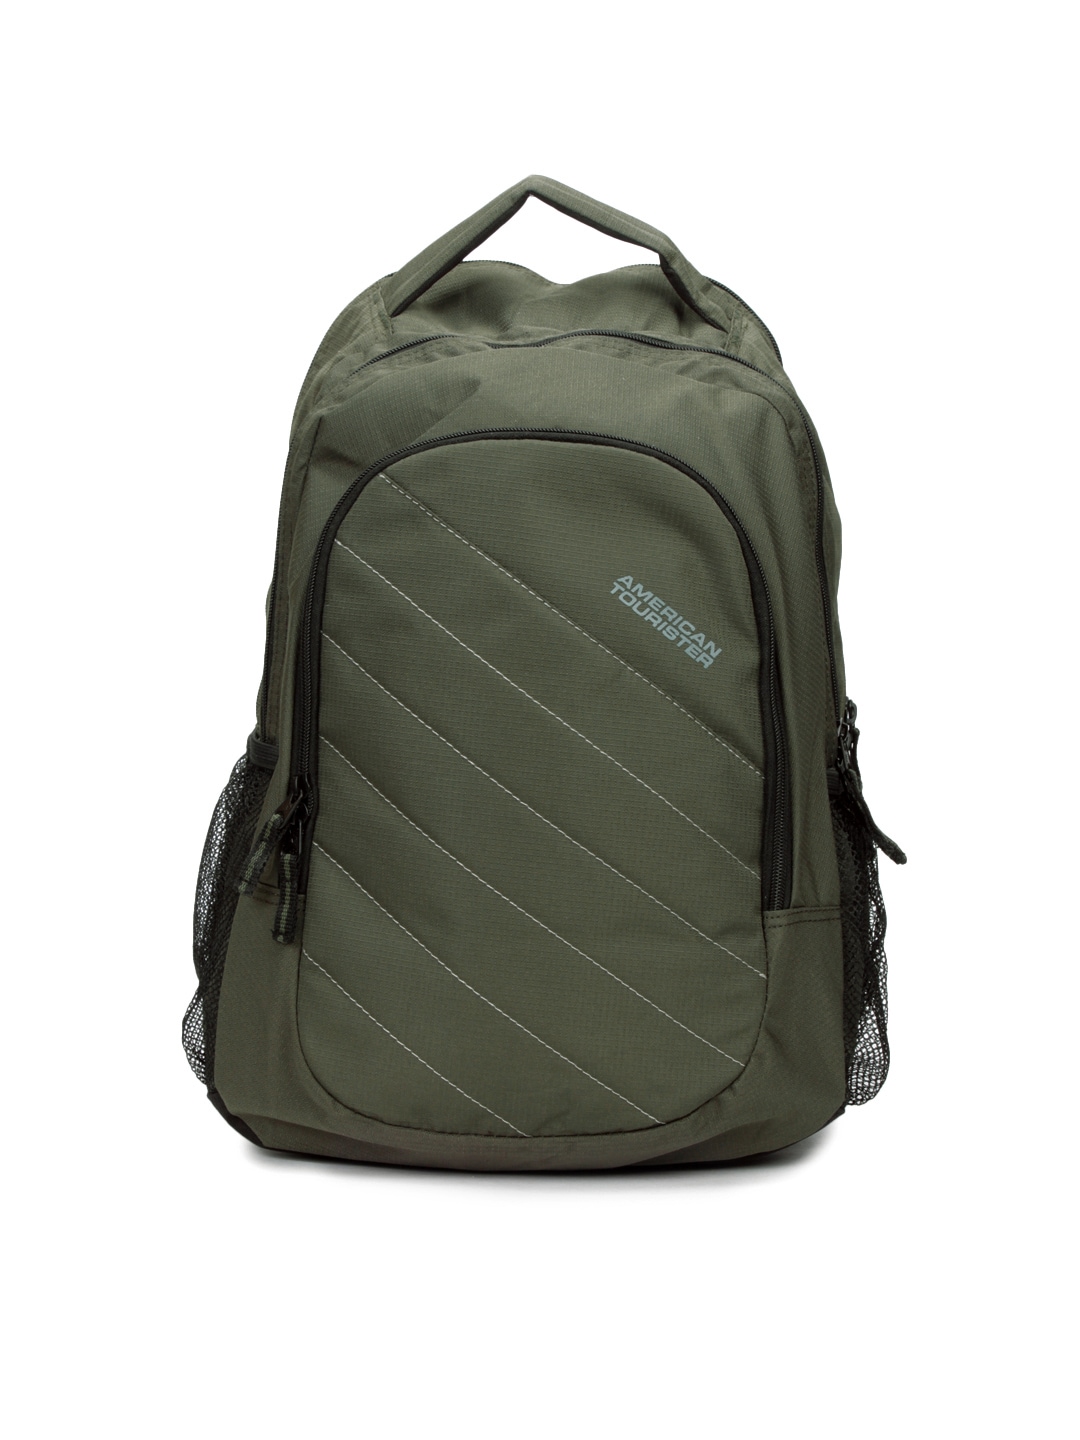 American Tourister Unisex Olive Backpack